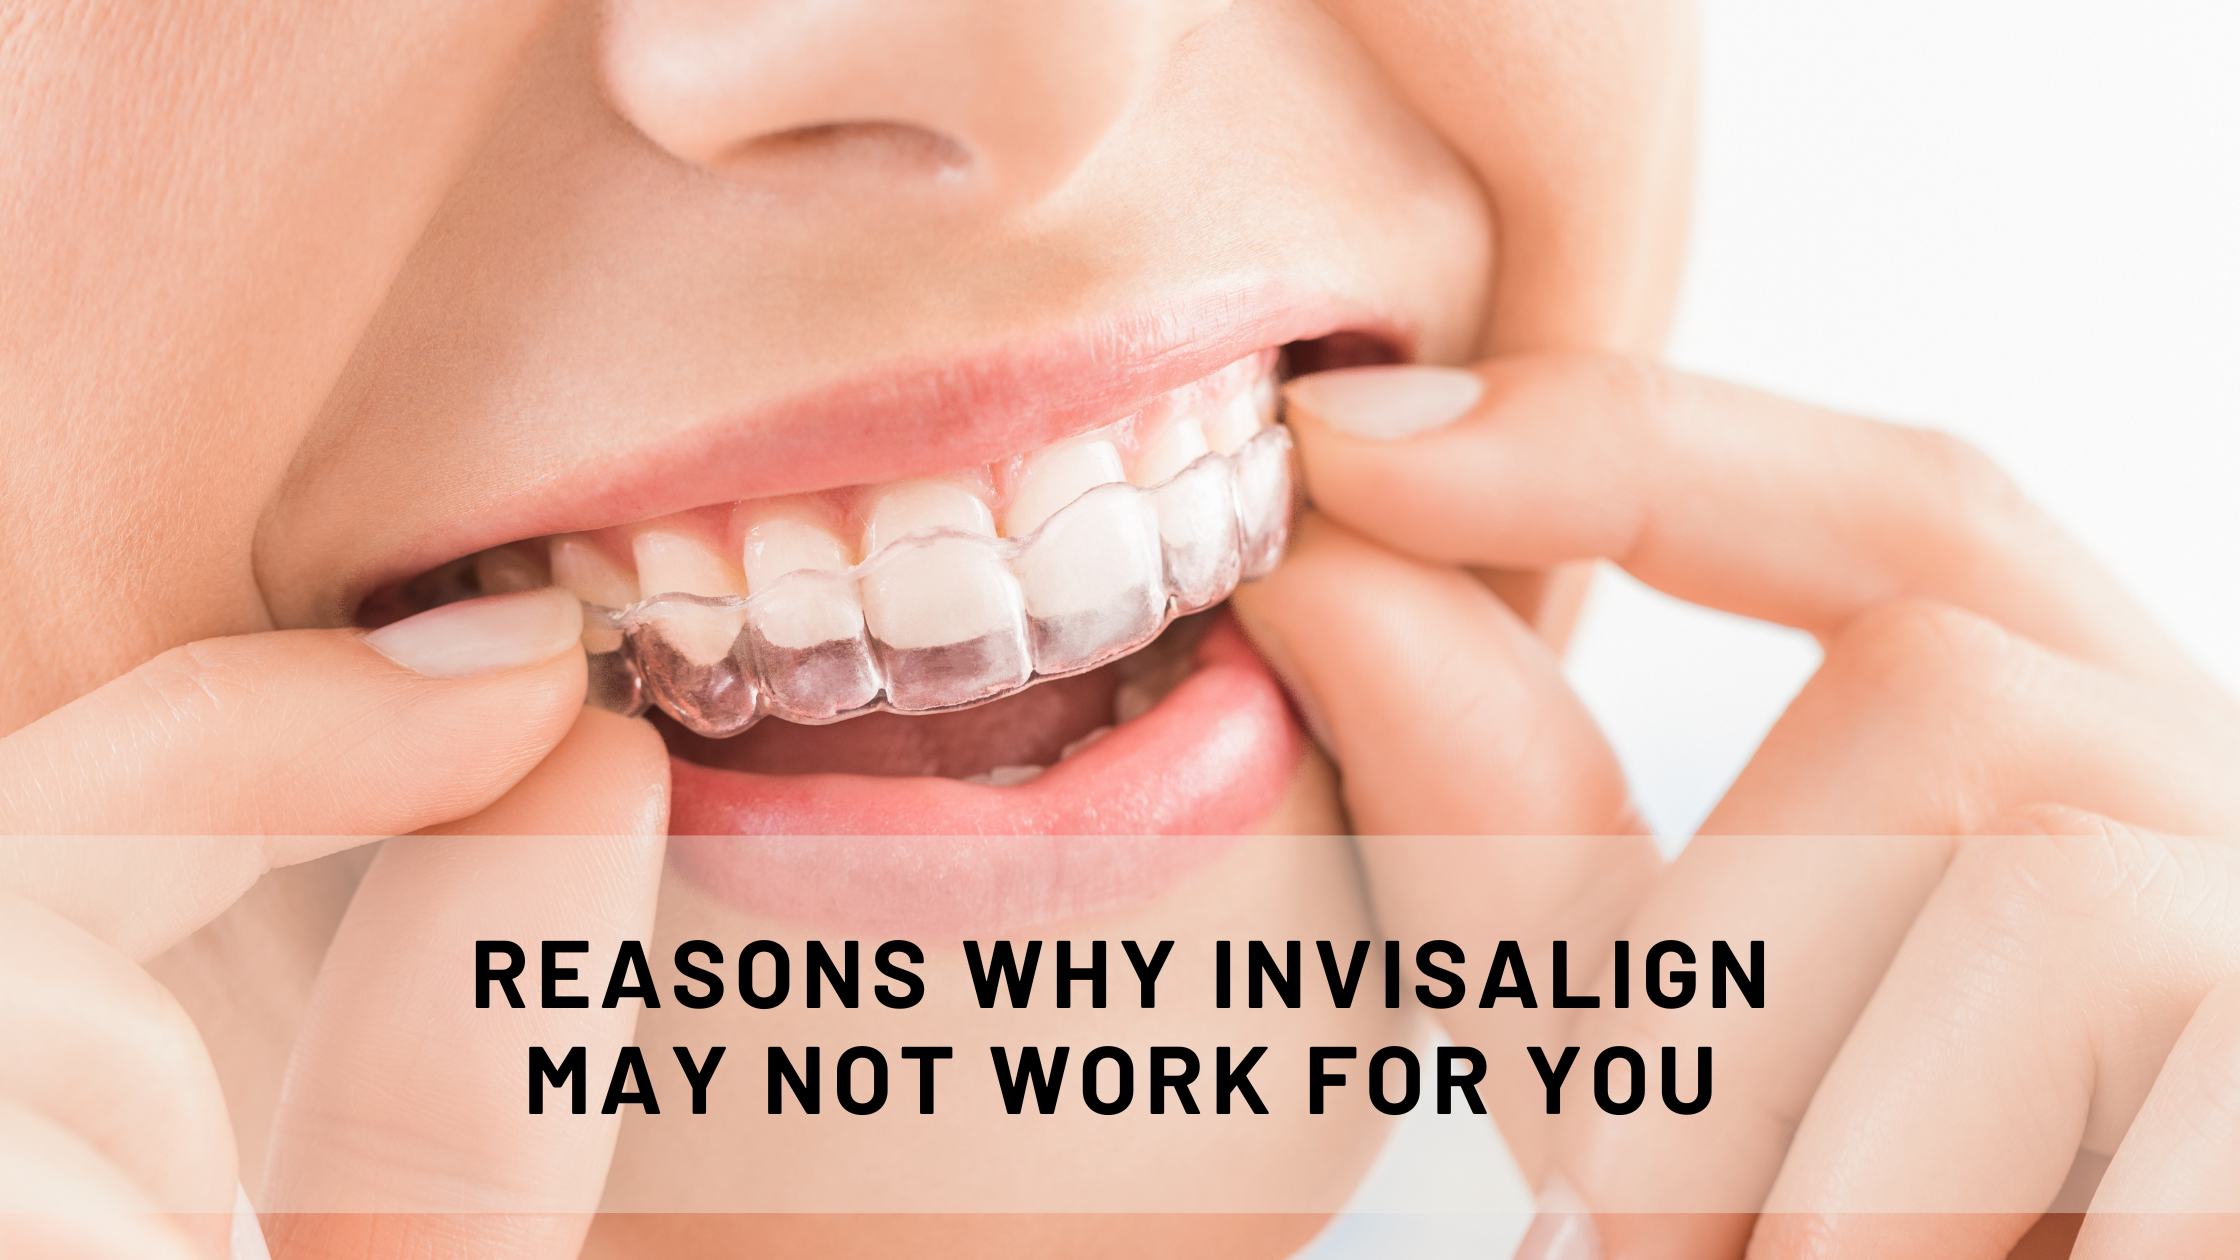 Reasons why Invisalign may not work for you